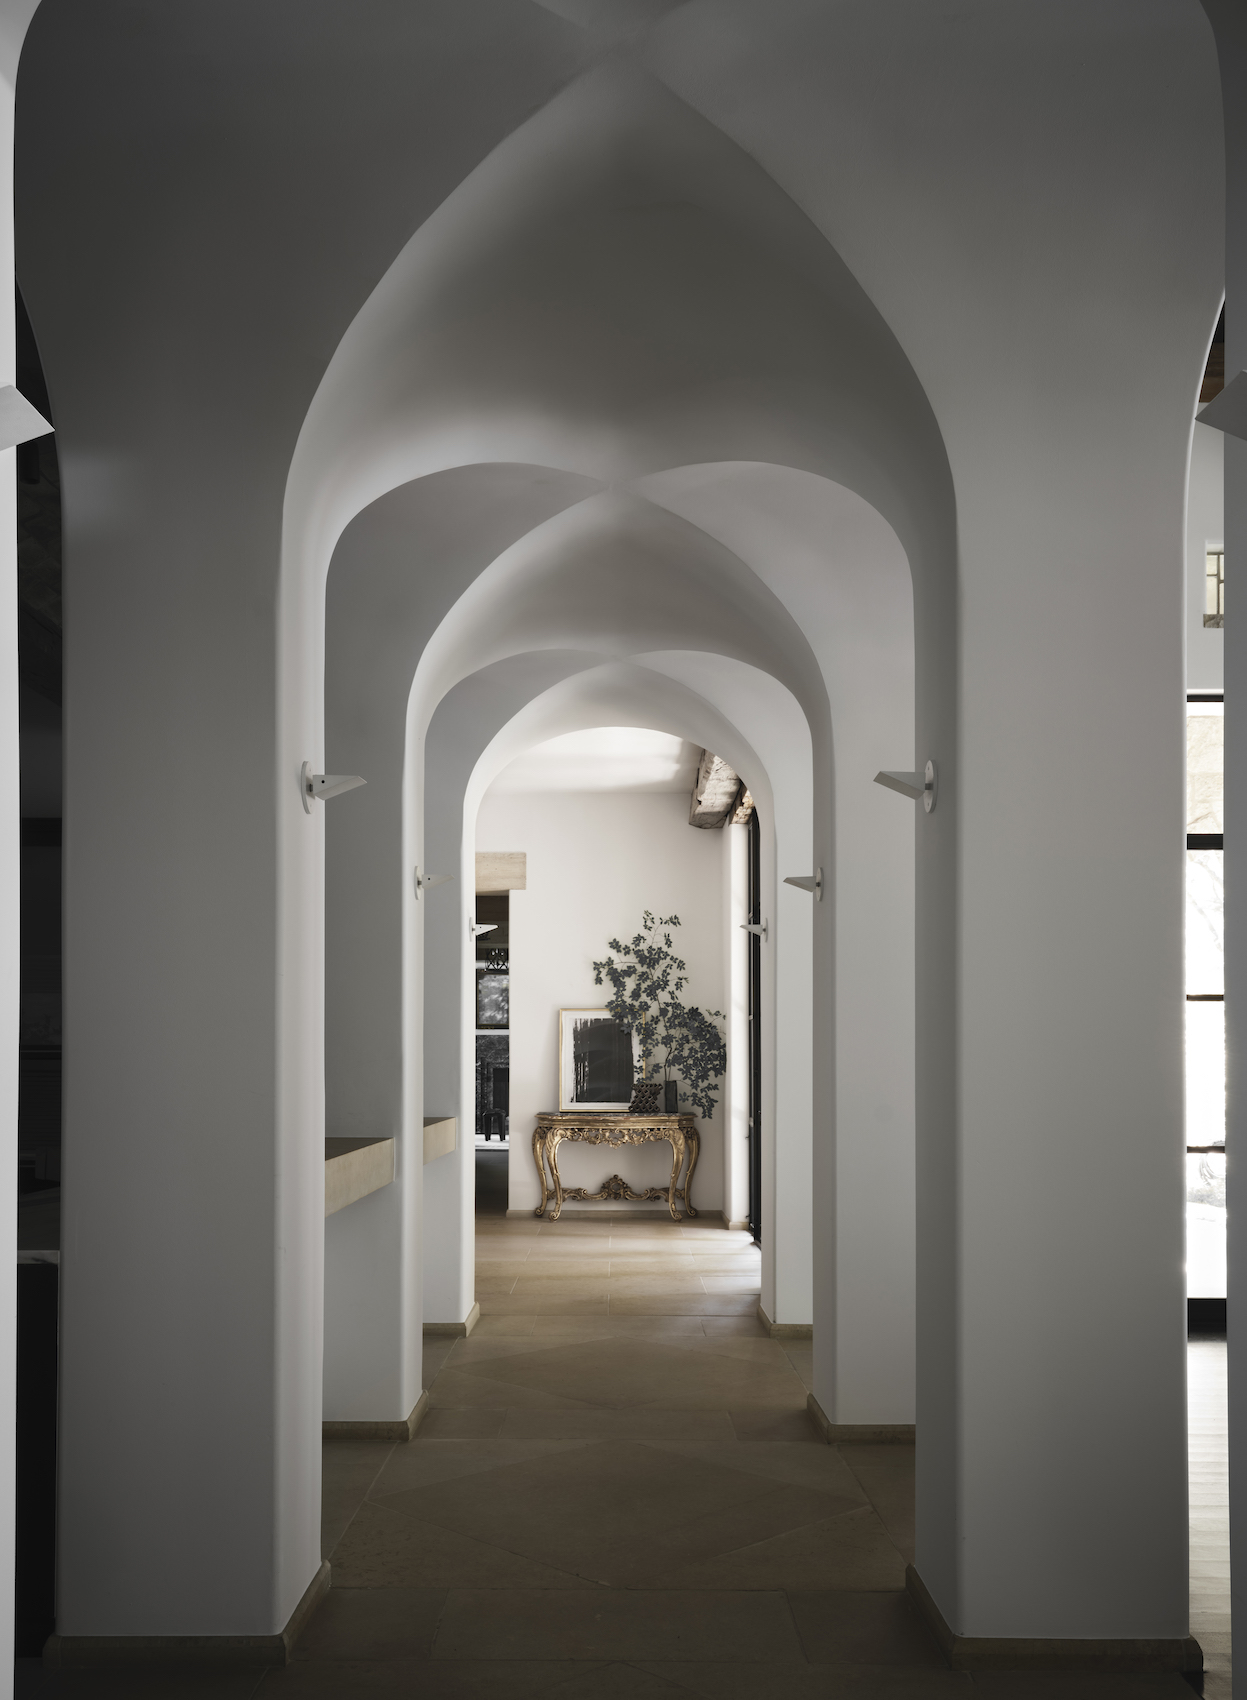 Arched corridor of a house interior designed by Chad Dorsey in Effect Magazine